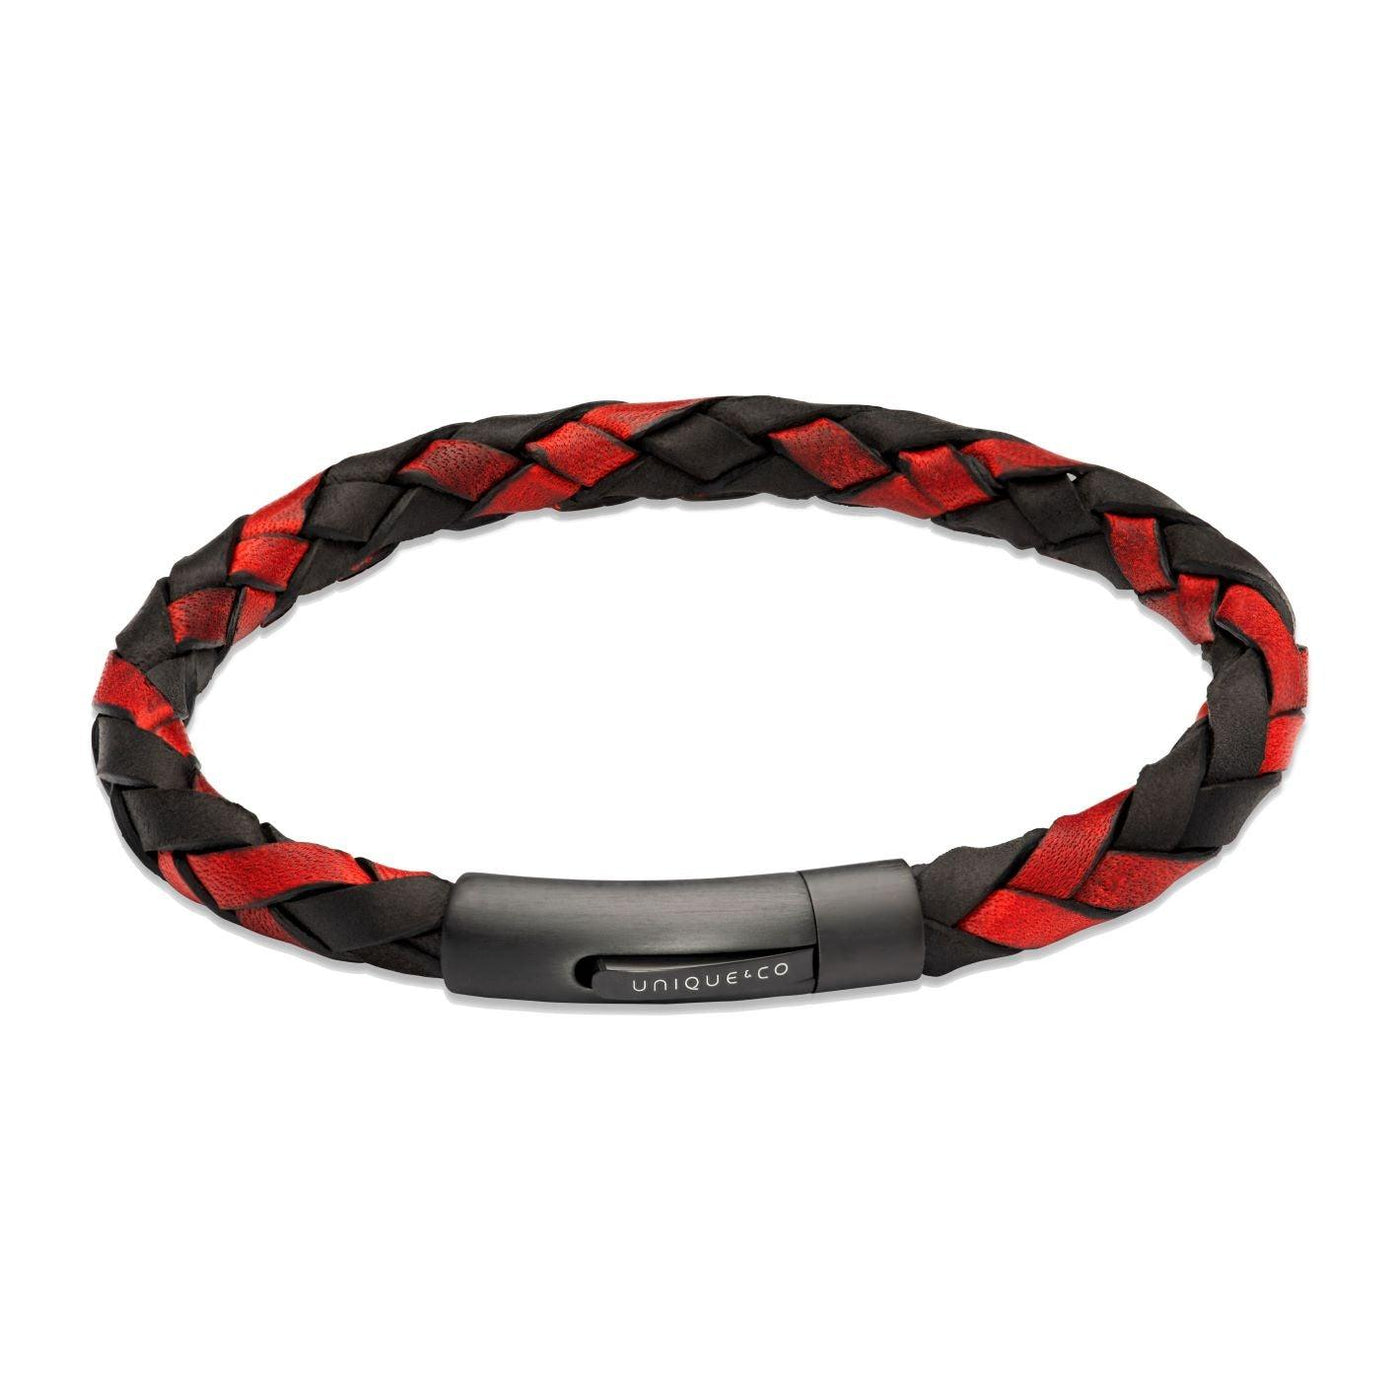 Unique & Co Entwined Black and Red Leather Bracelet - Rococo Jewellery